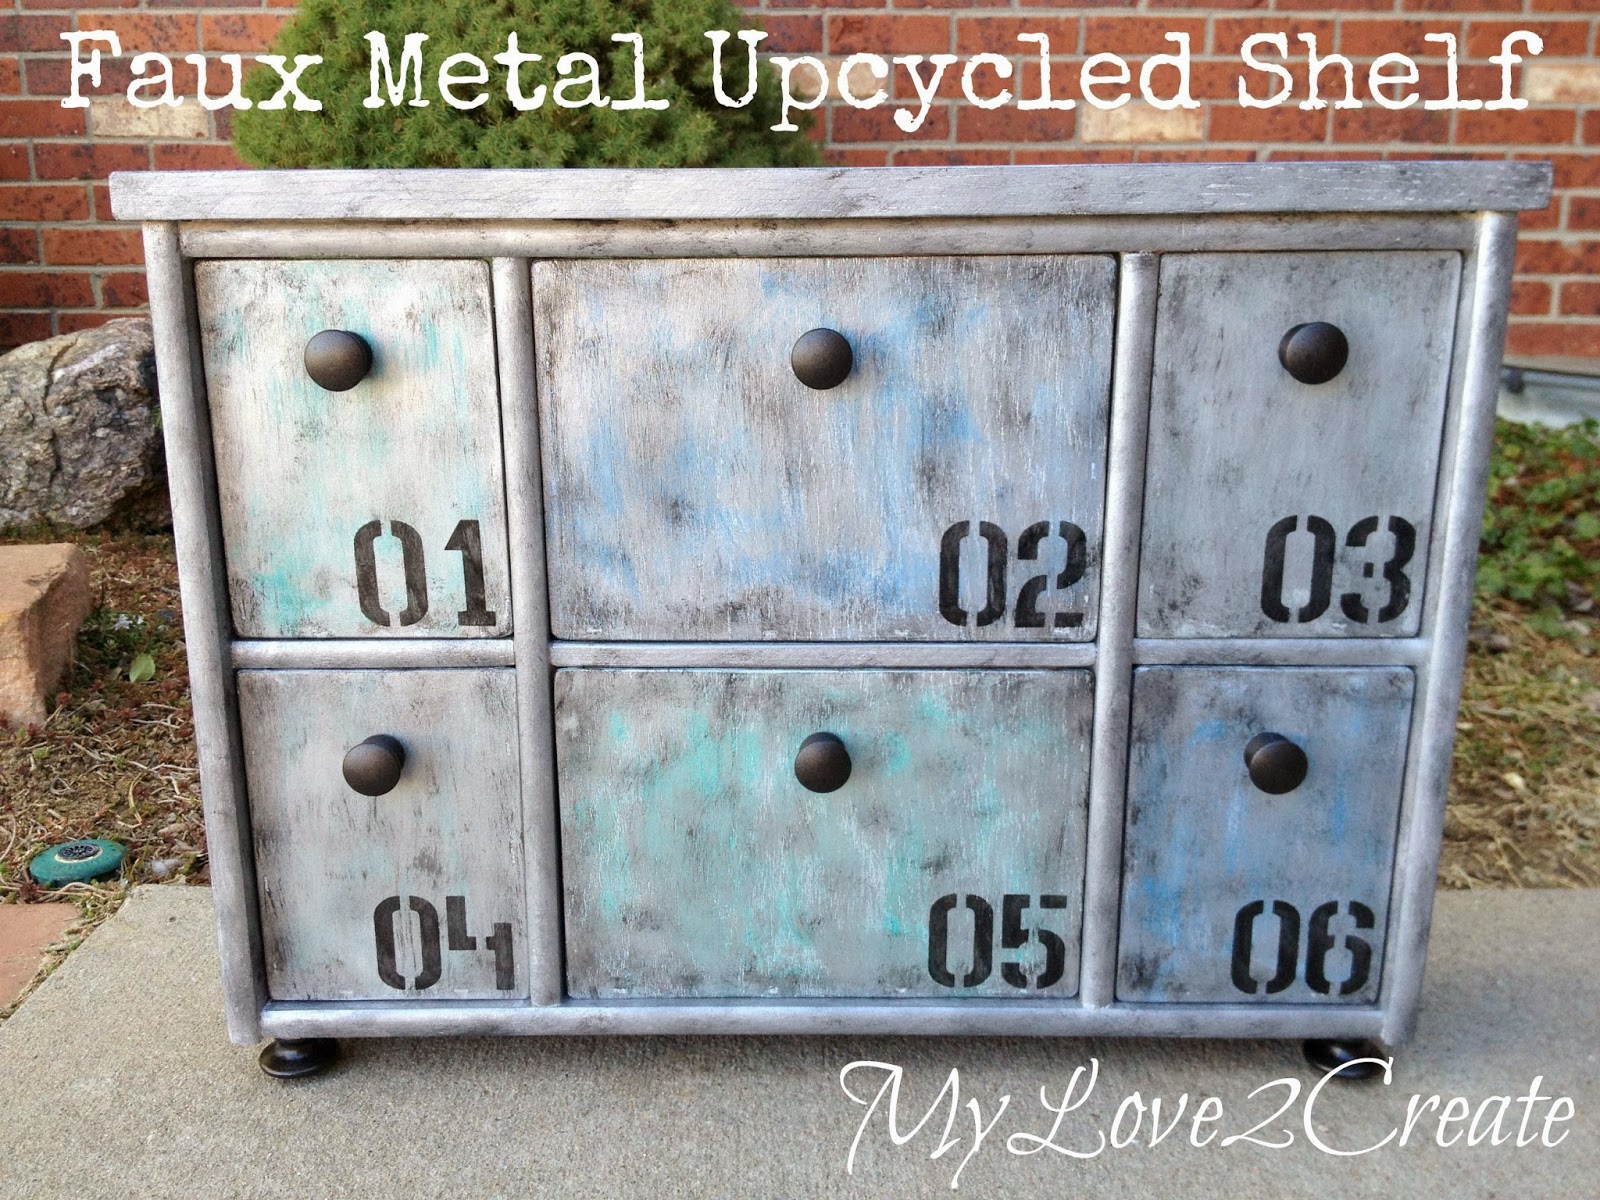 Faux Metal Upcycled Shelf after